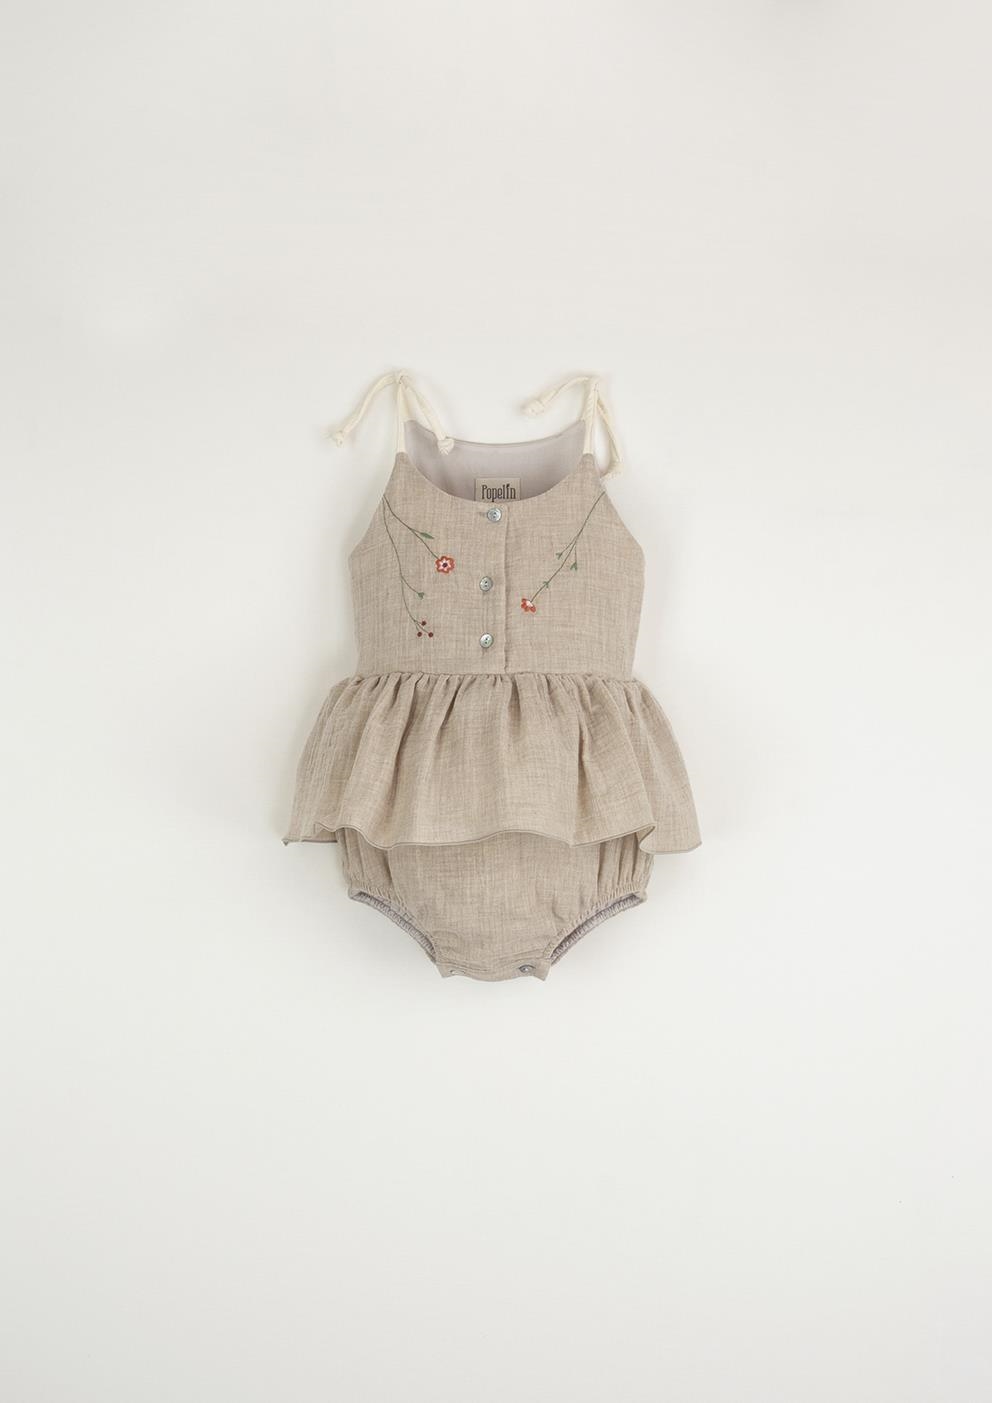 Mod.10.2 Sand organic romper suit with straps | SS23 Mod.10.2 Sand organic romper suit with straps